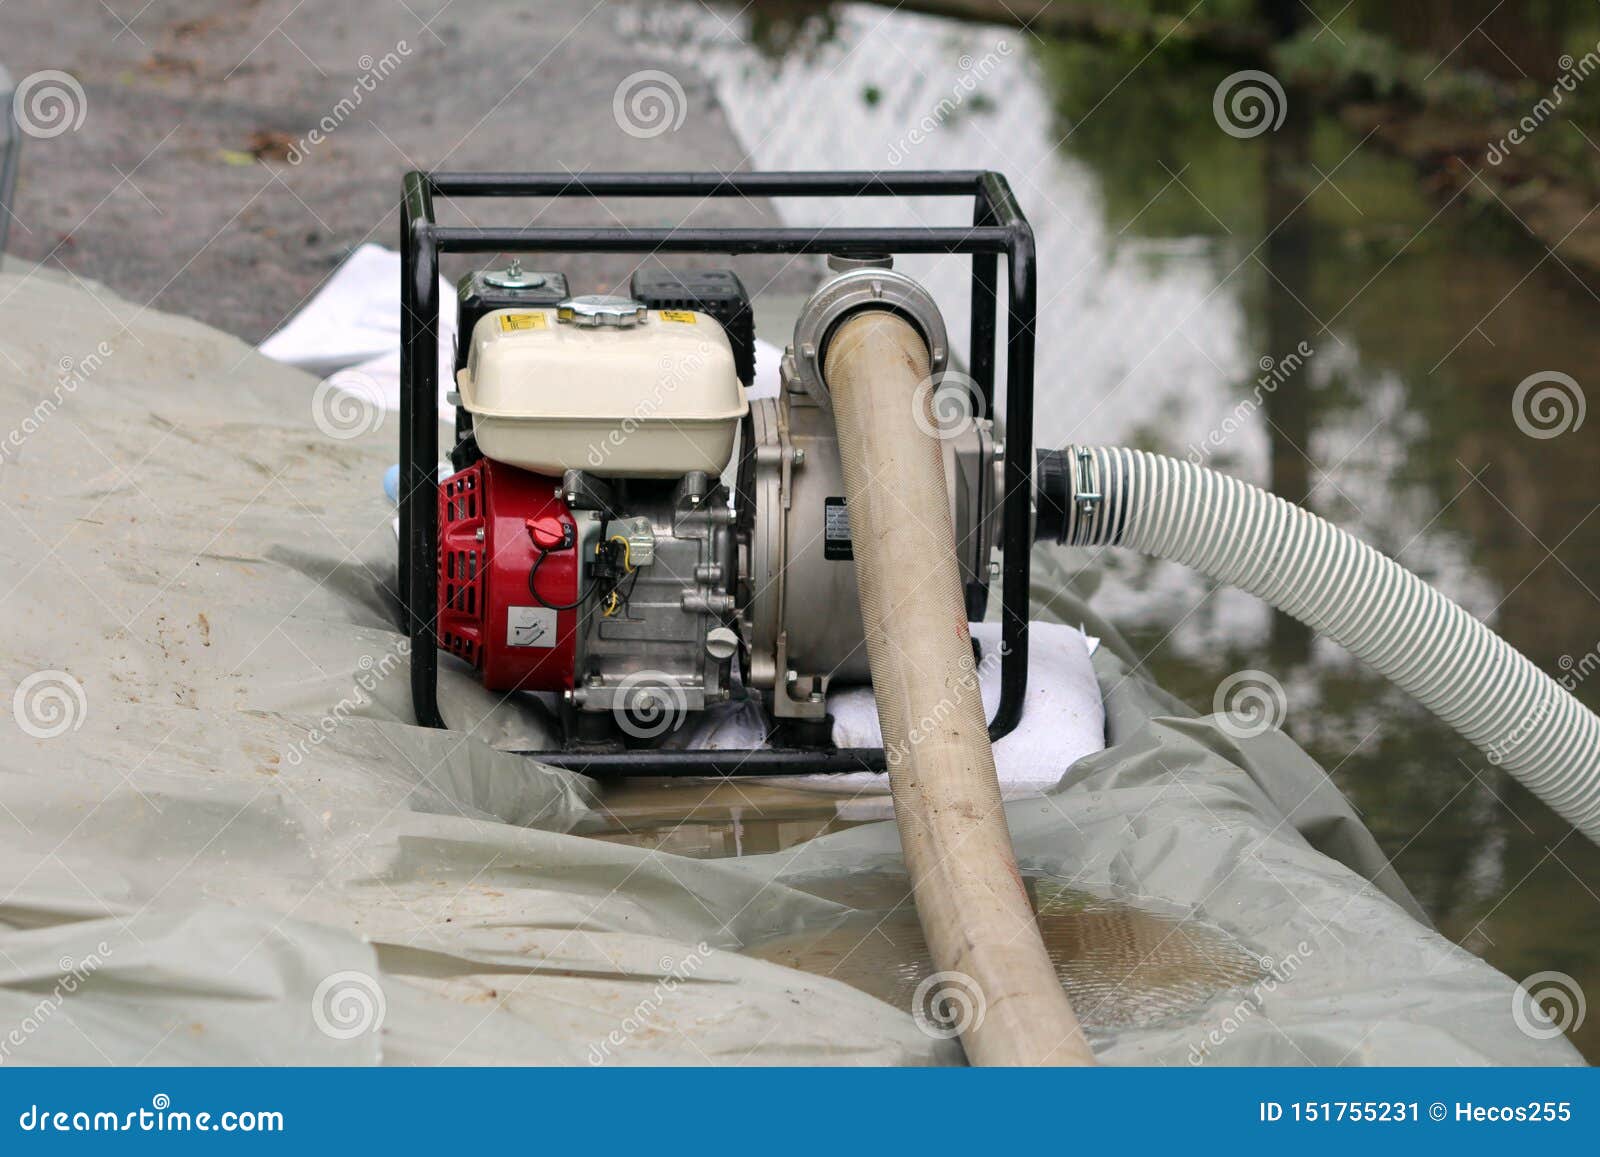 bånd Decode malt Small Industrial Petrol Water Pump with Metal Frame Left on Top of  Improvised Sandbags Flood Protection Wall To Pump Flood Water Stock Image -  Image of small, backyard: 151755231